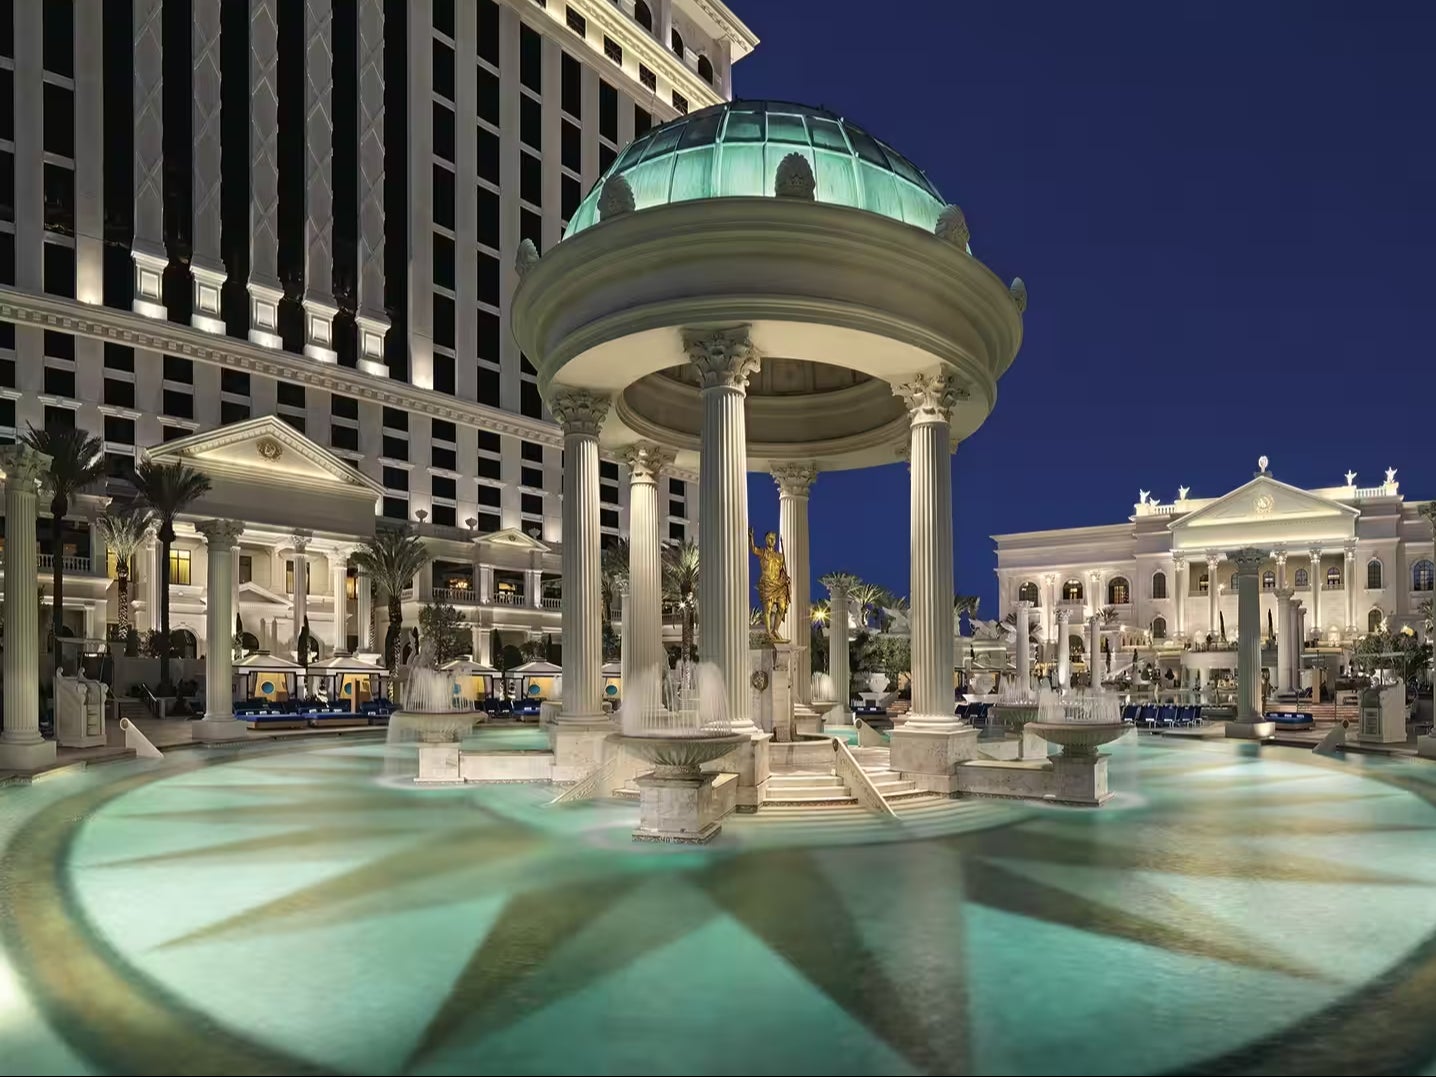 Extra charge: Ceasars Palace imposes a $46 resort fee per room per night